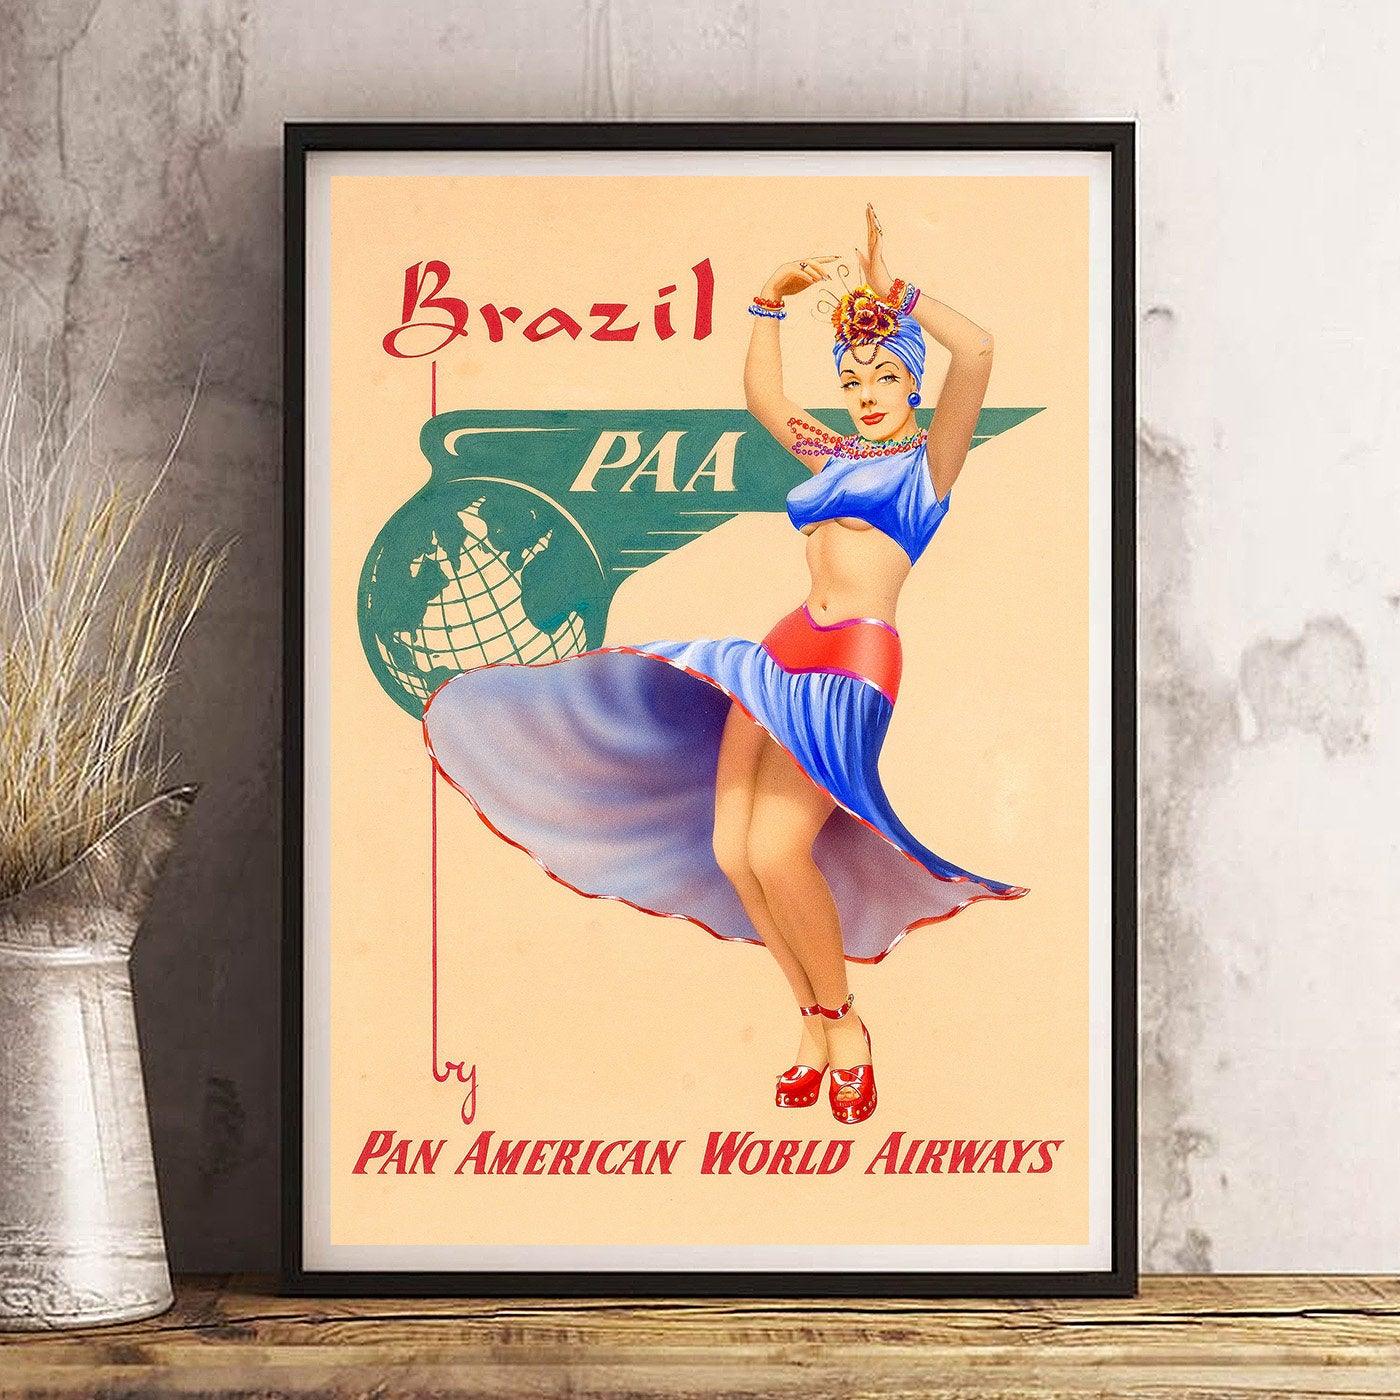 BRAZIL - Vintage Travel Poster - Classic Posters